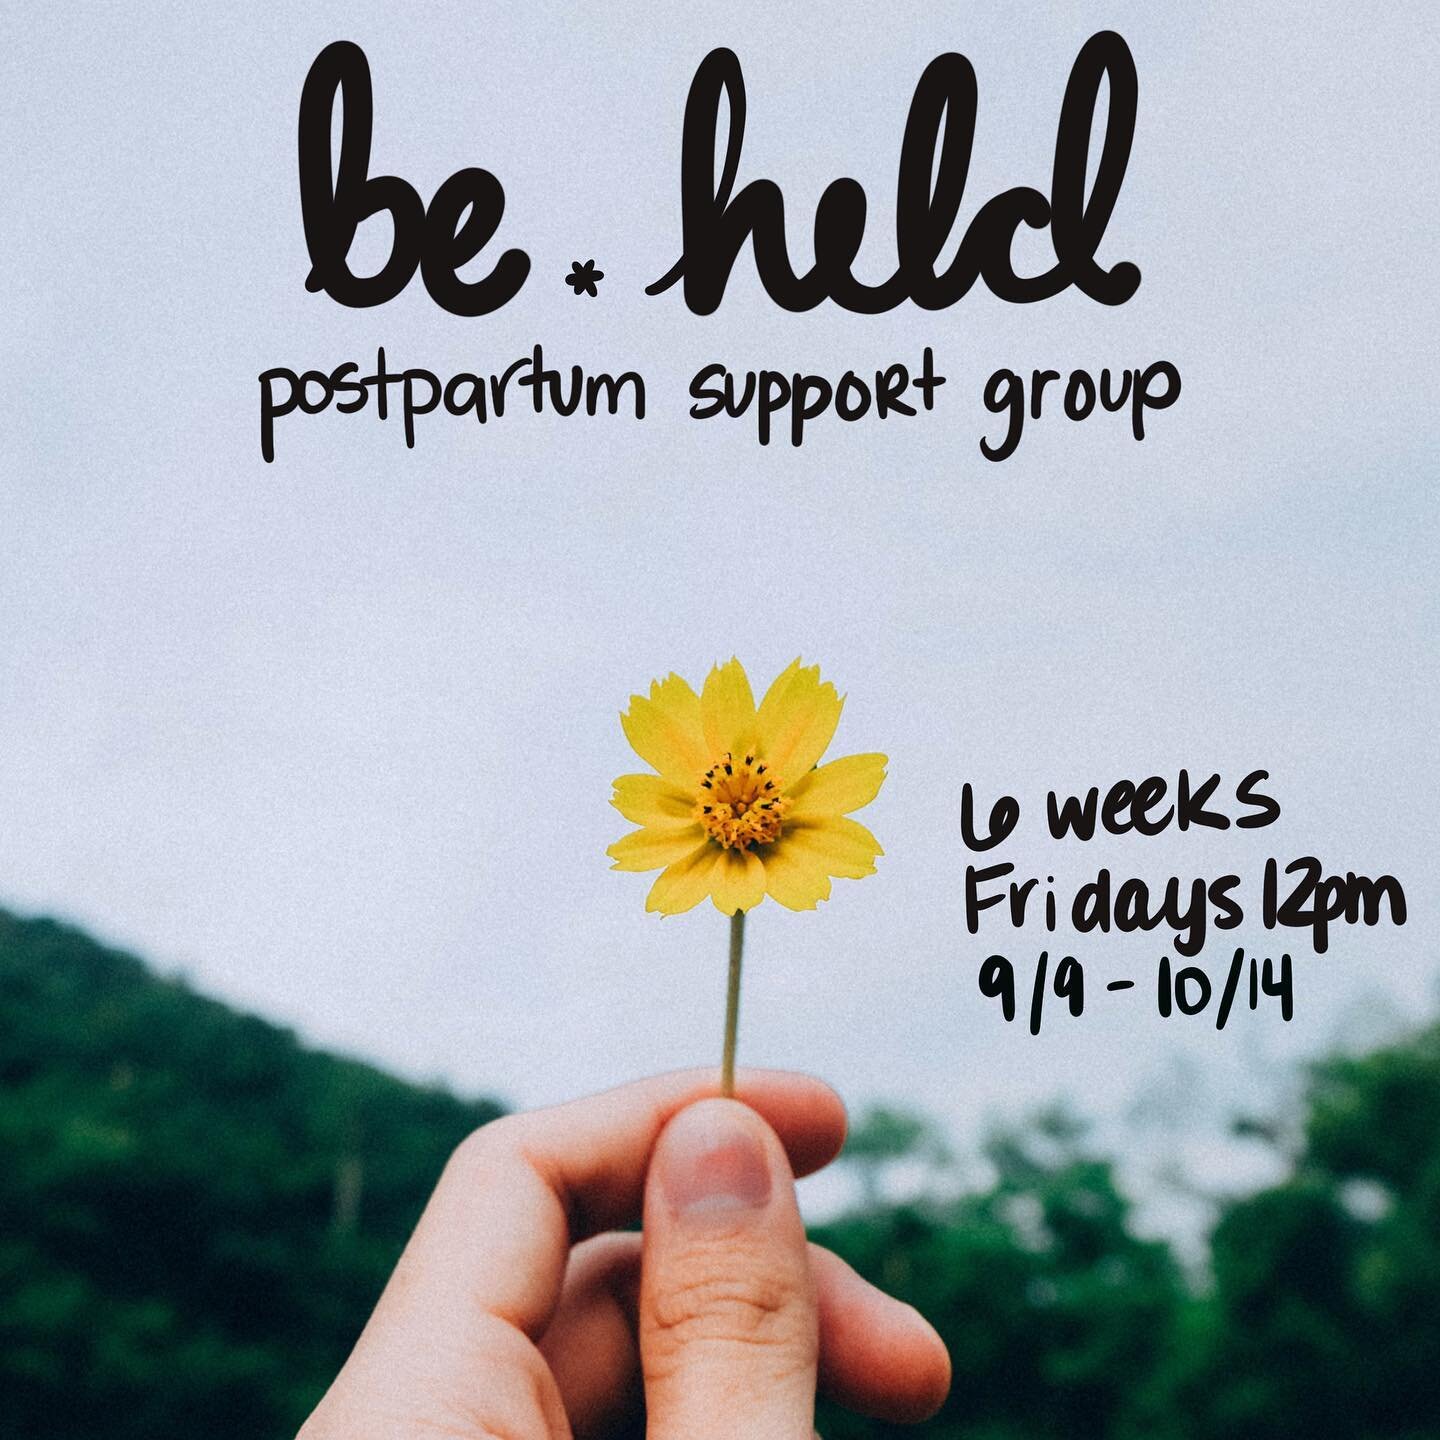 Join our next new parent support group, starting September 9!

It&rsquo;s been an amazing space to build community, share in the ups and downs of postpartum, and explore new identities &amp; relationships. DM with any questions or sign up at the link